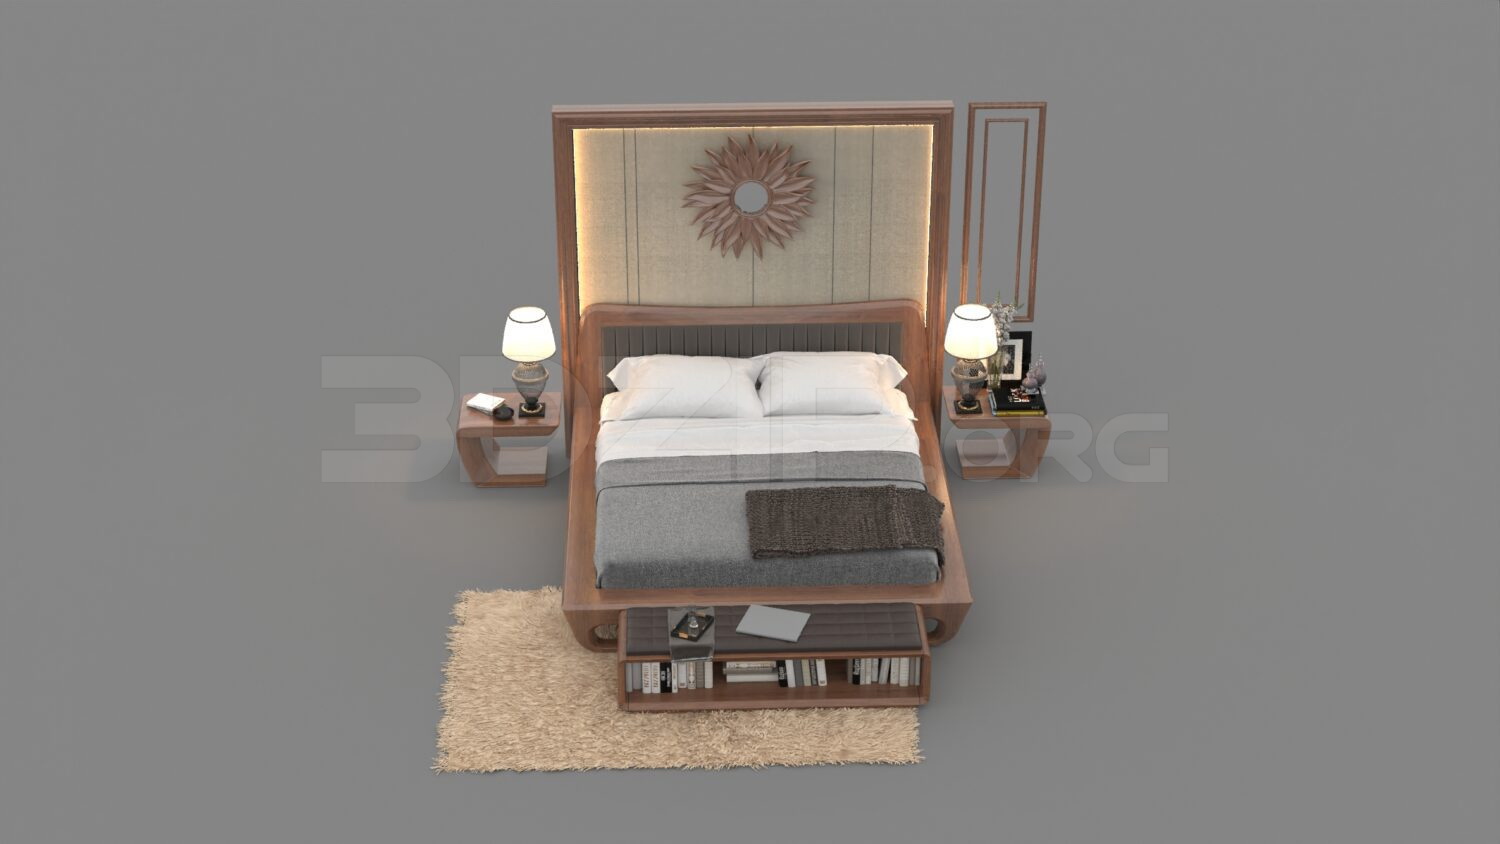 1757. Download Free Bed Model By Nam Dang